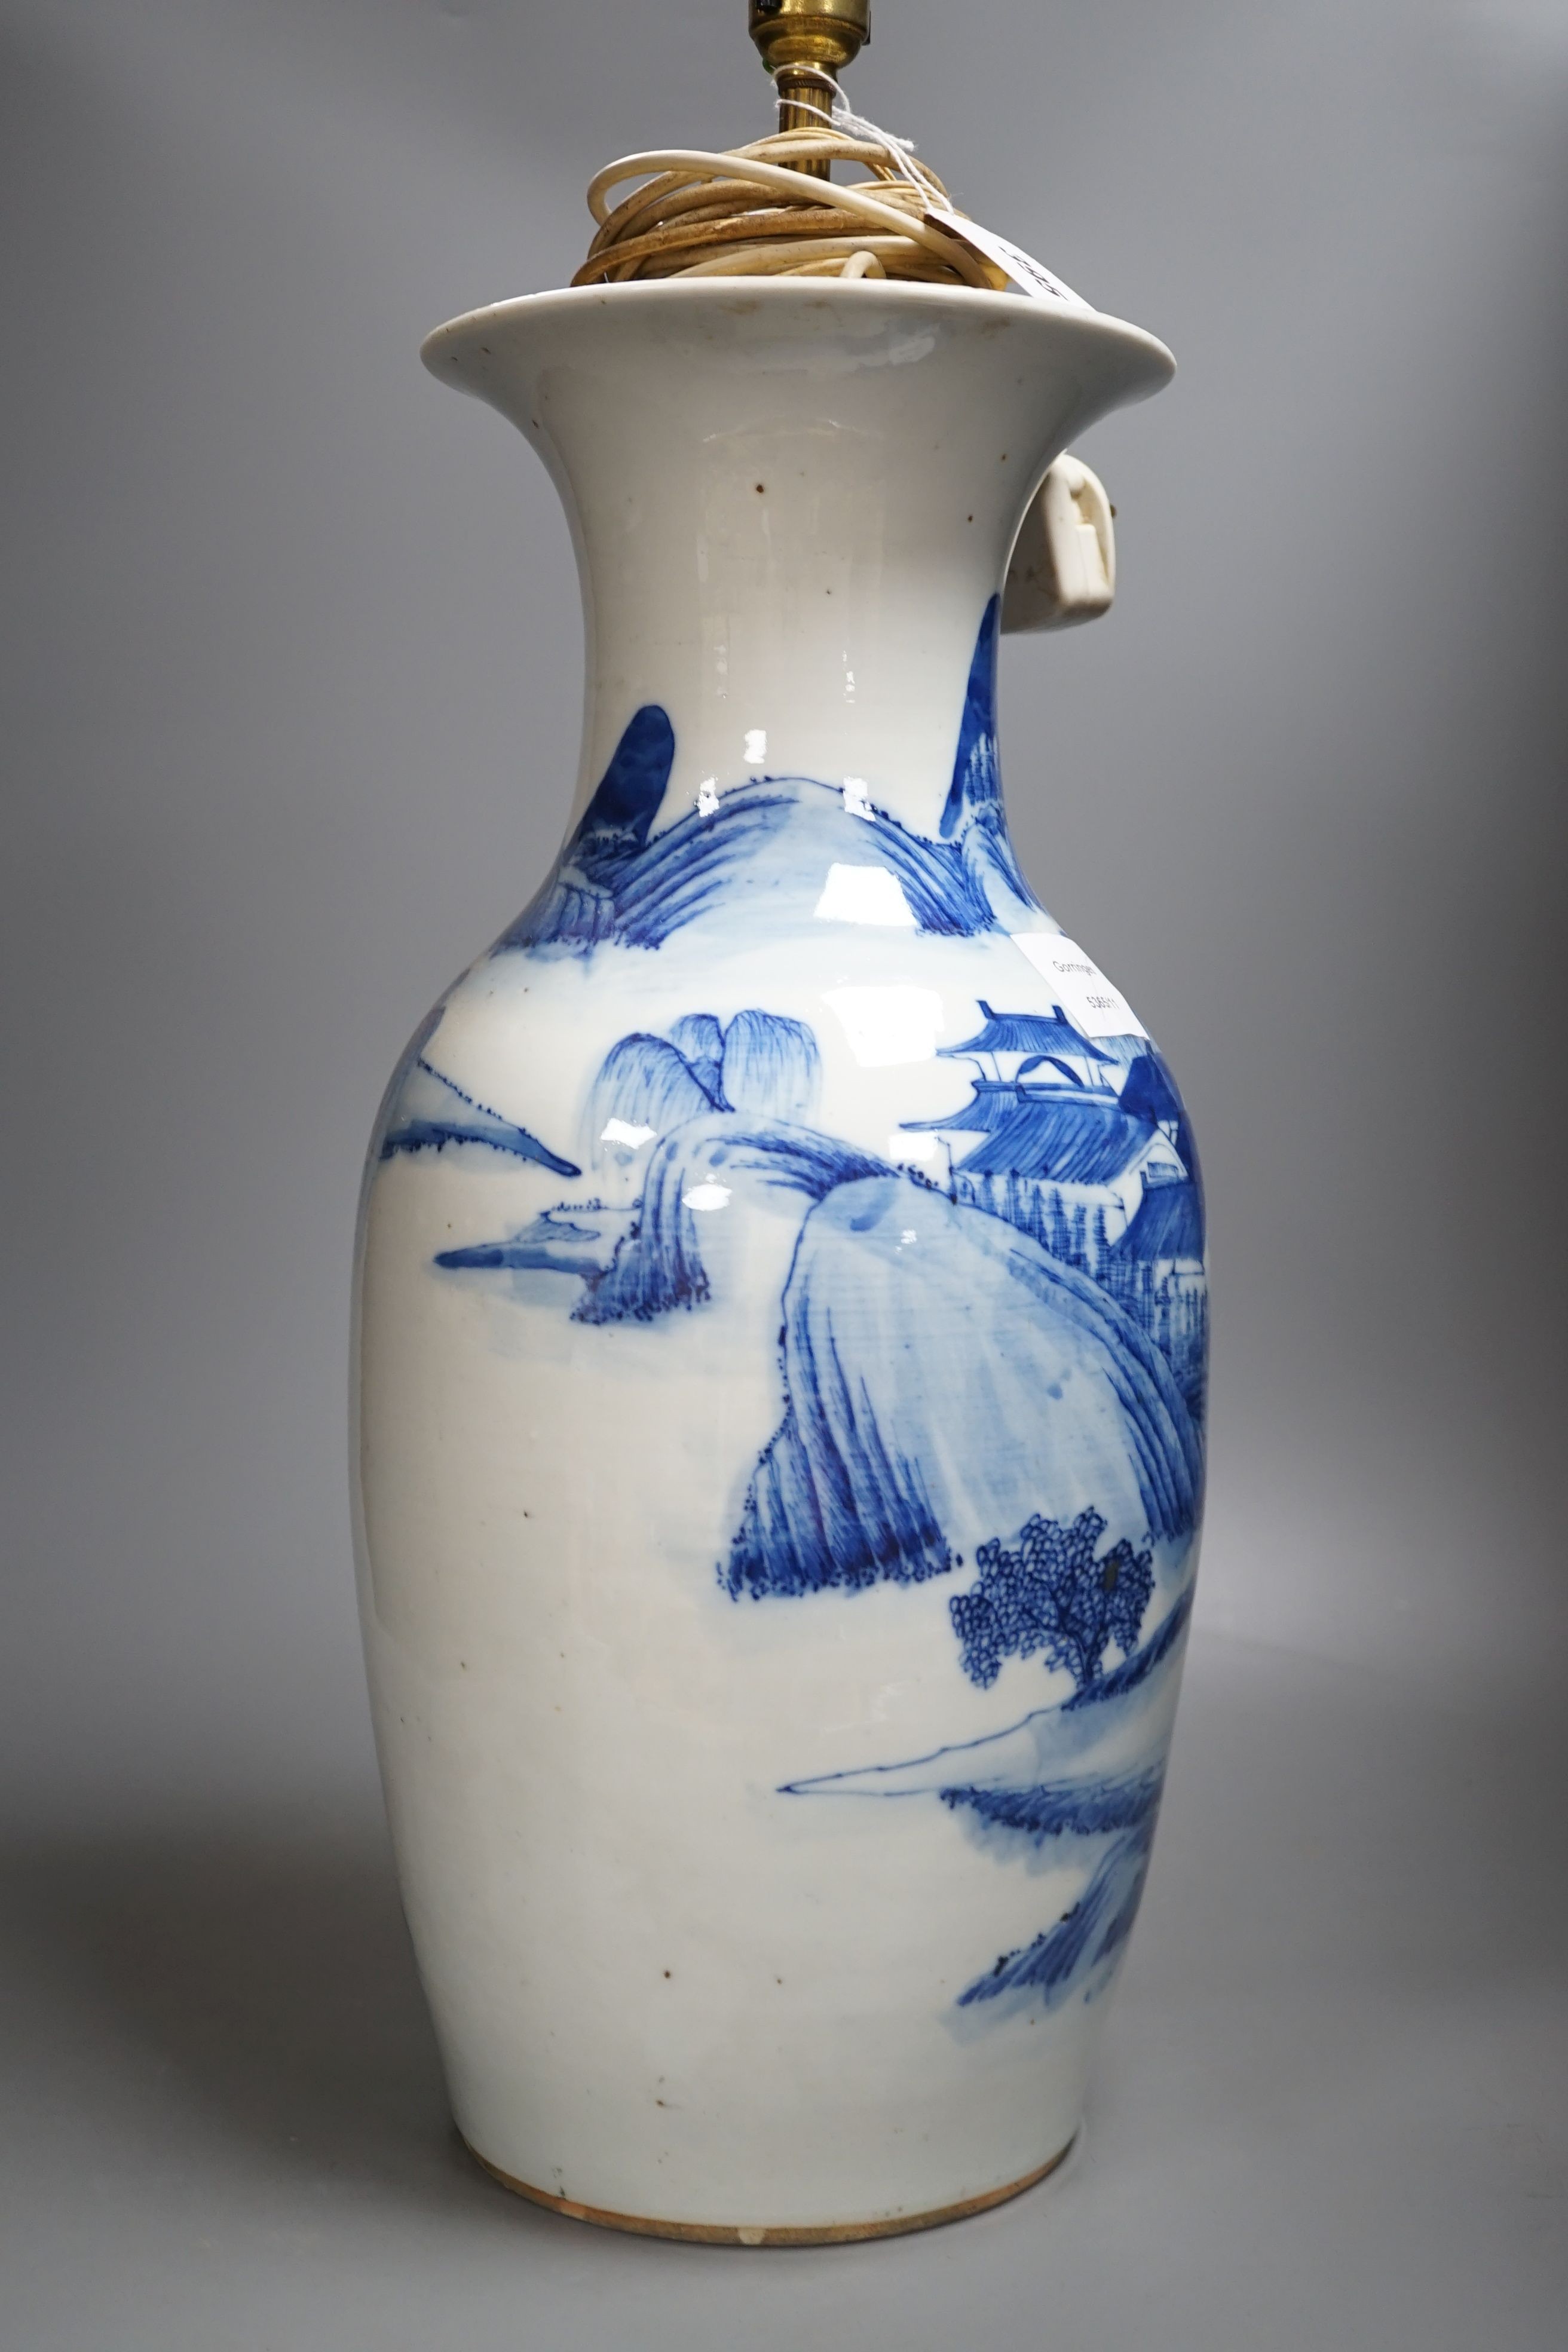 An early 20th century Chinese blue and white landscape vase converted to a lamp, total height 58cm